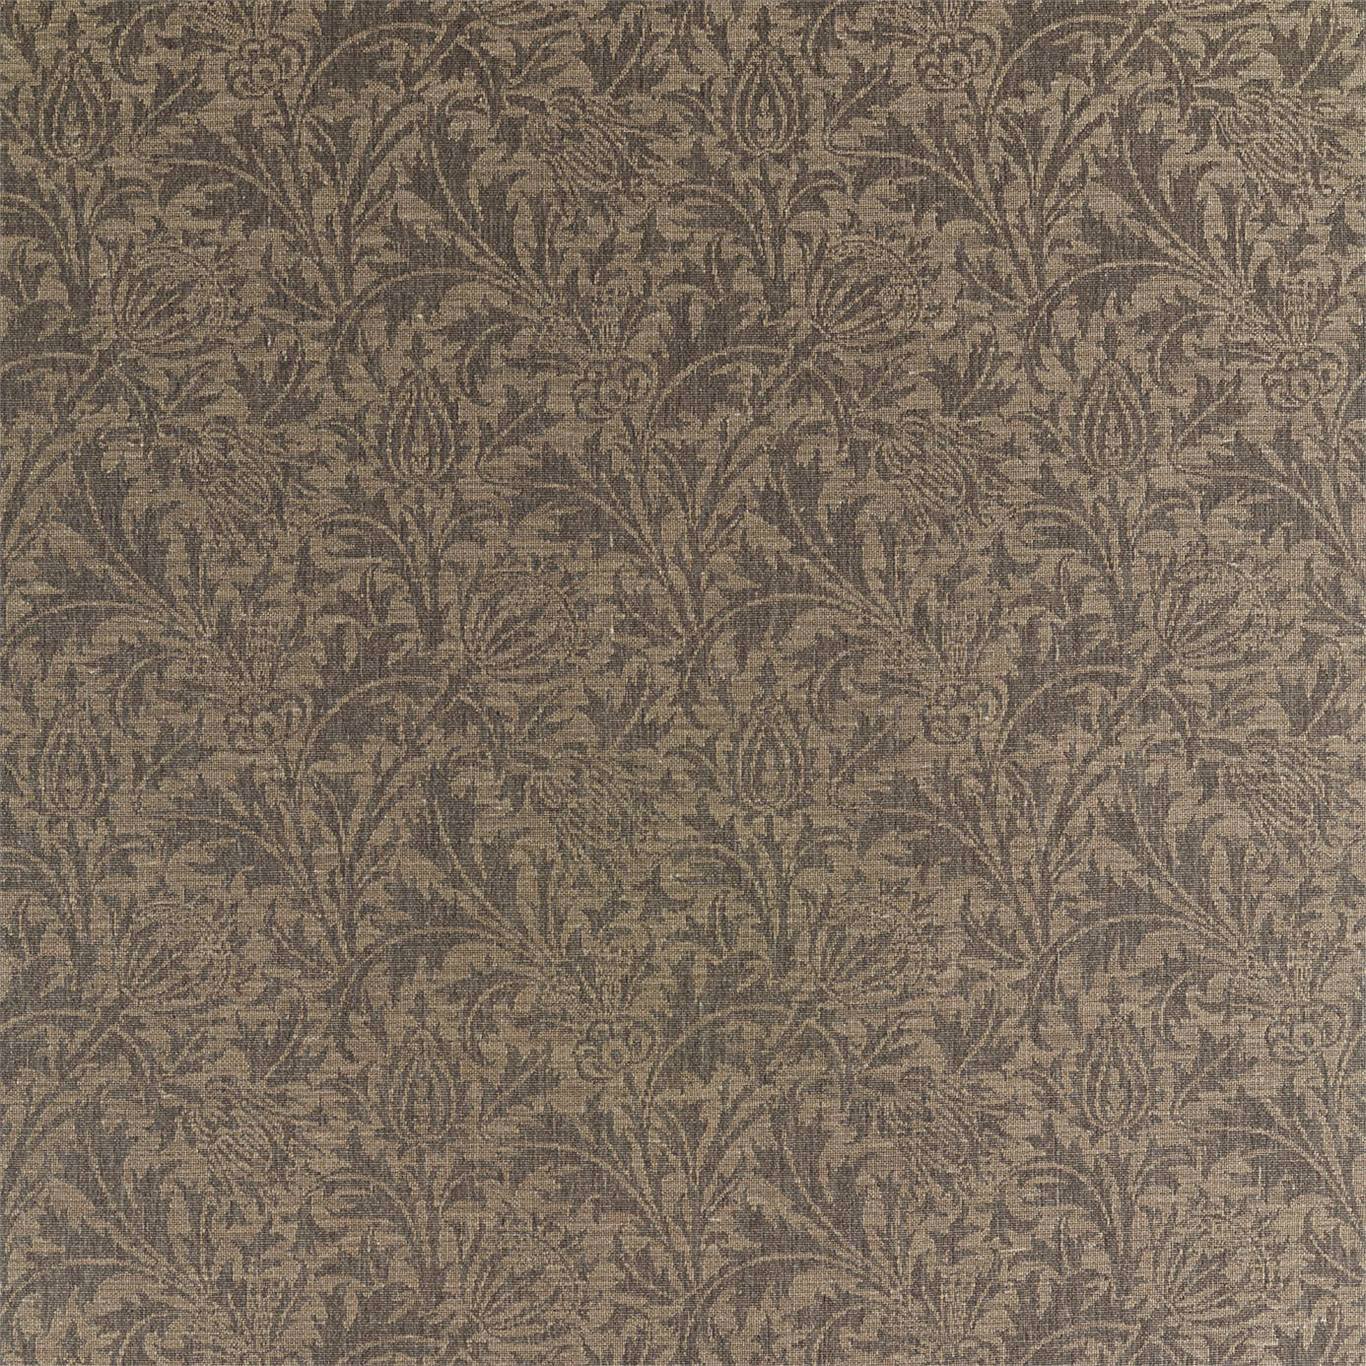 Thistle Weave Fabric by Morris & Co.